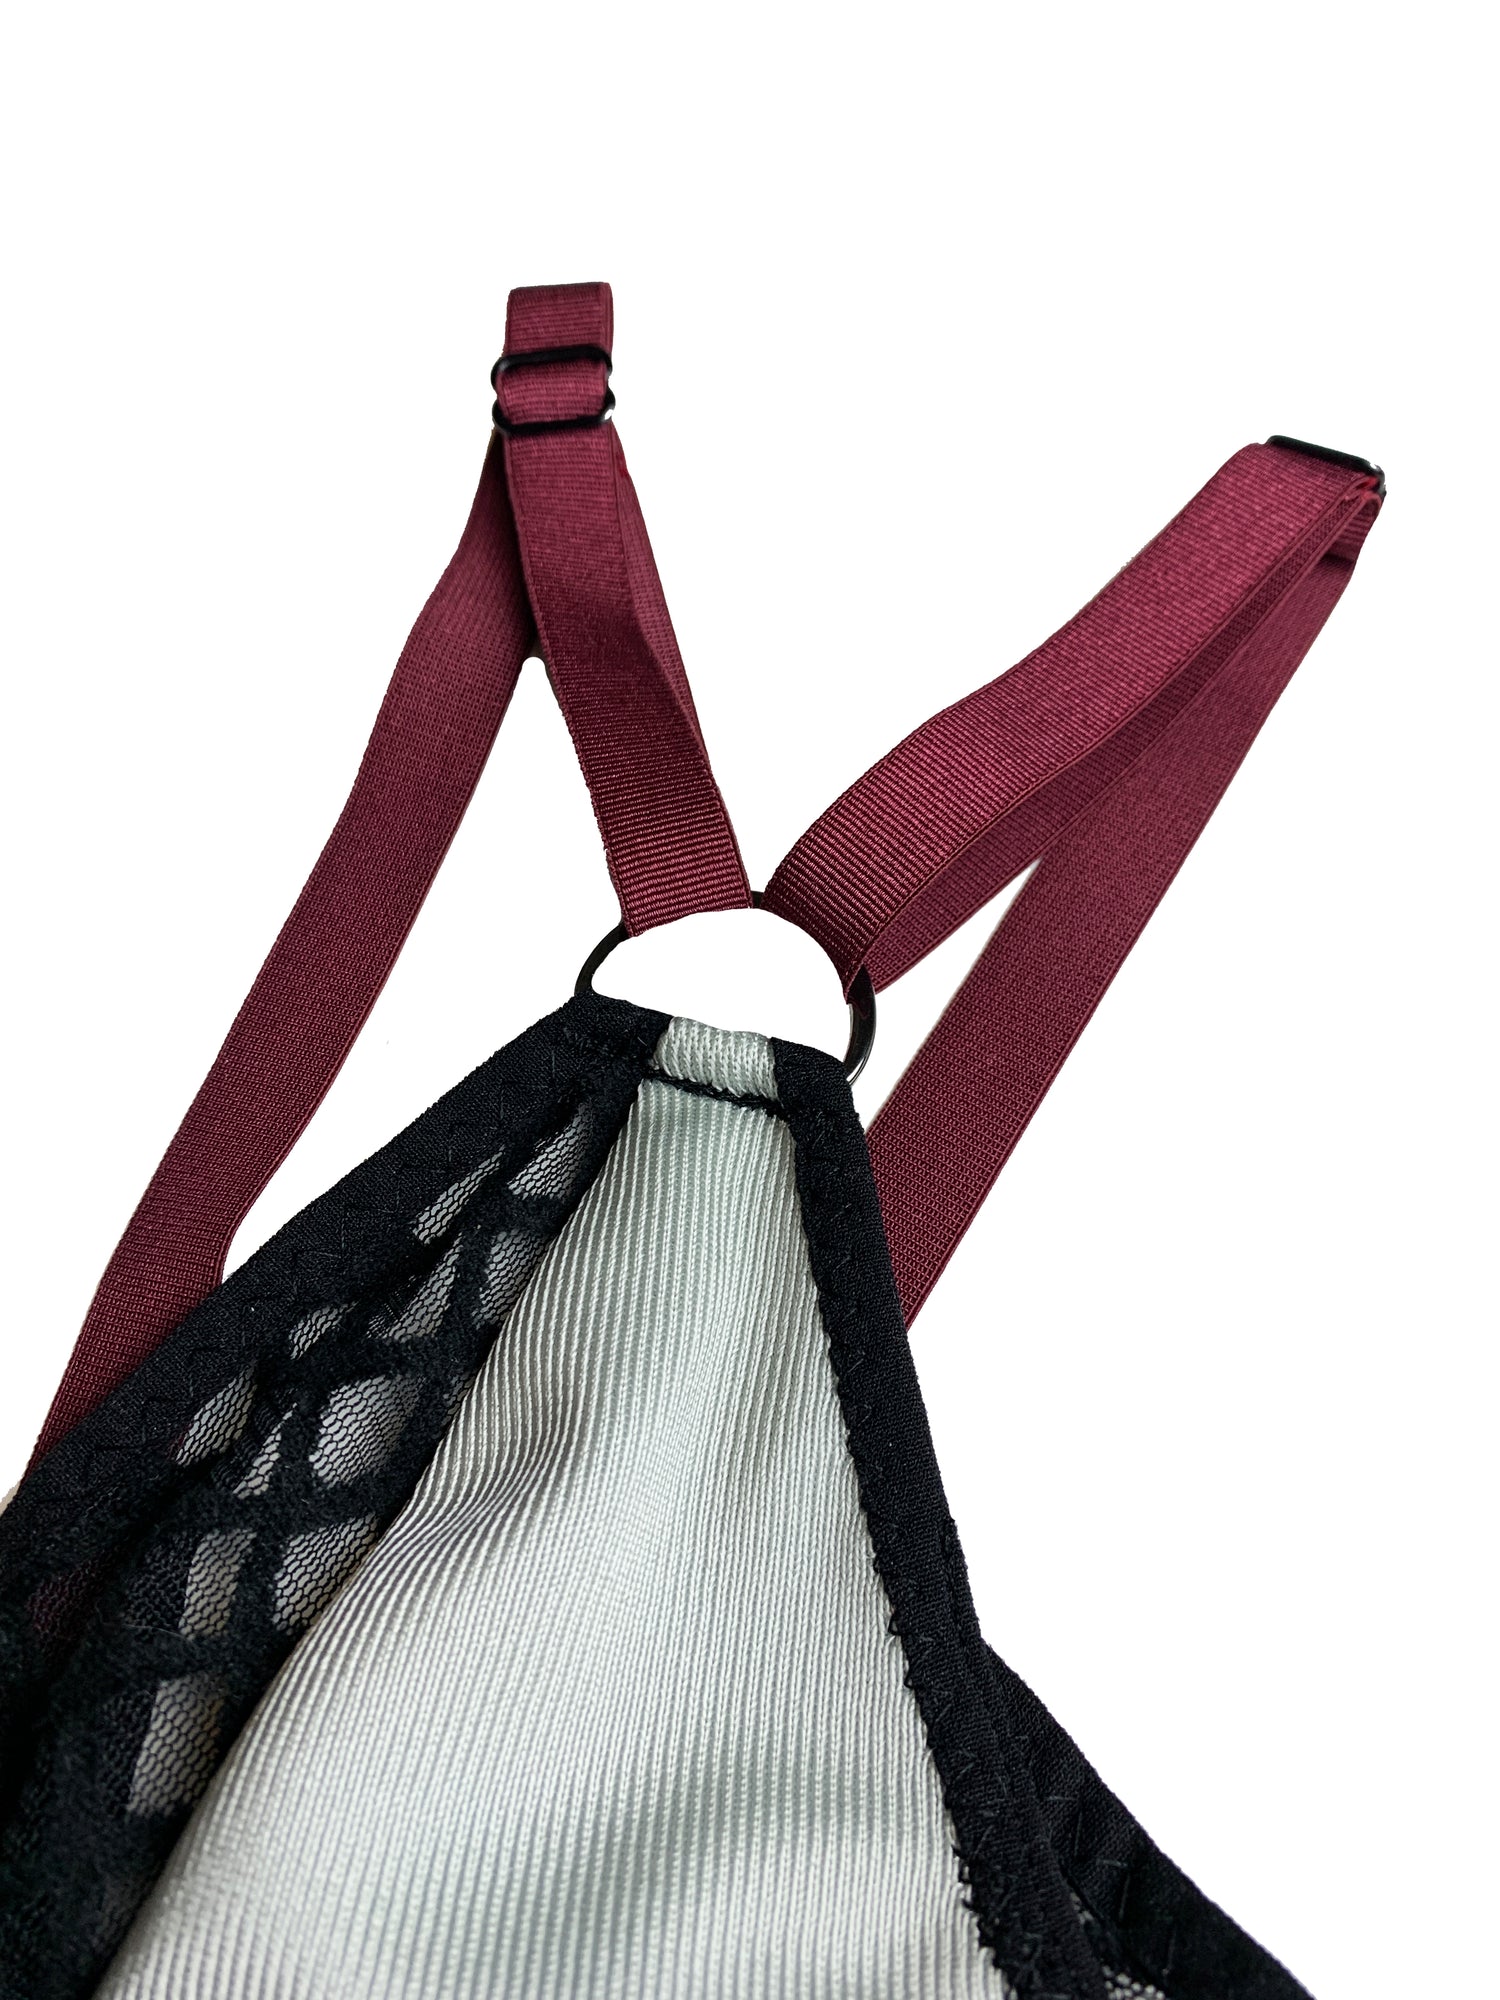 detailing of a bralette with gray, black, and deep purple coloring